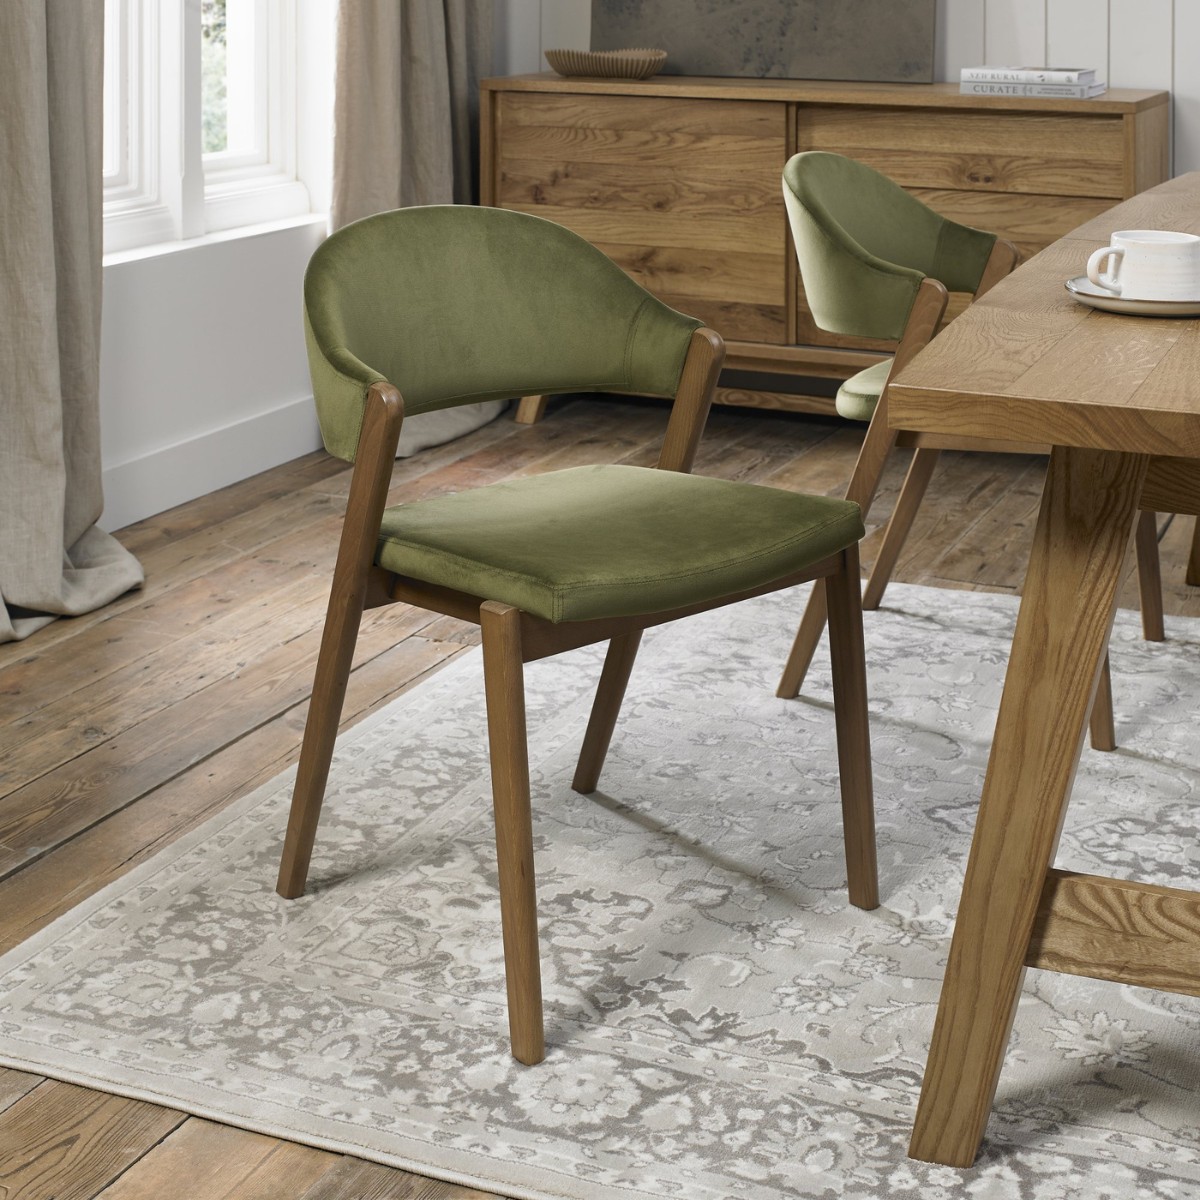 Chambery Rustic Oak Upholstered Dining Chair Green - 4